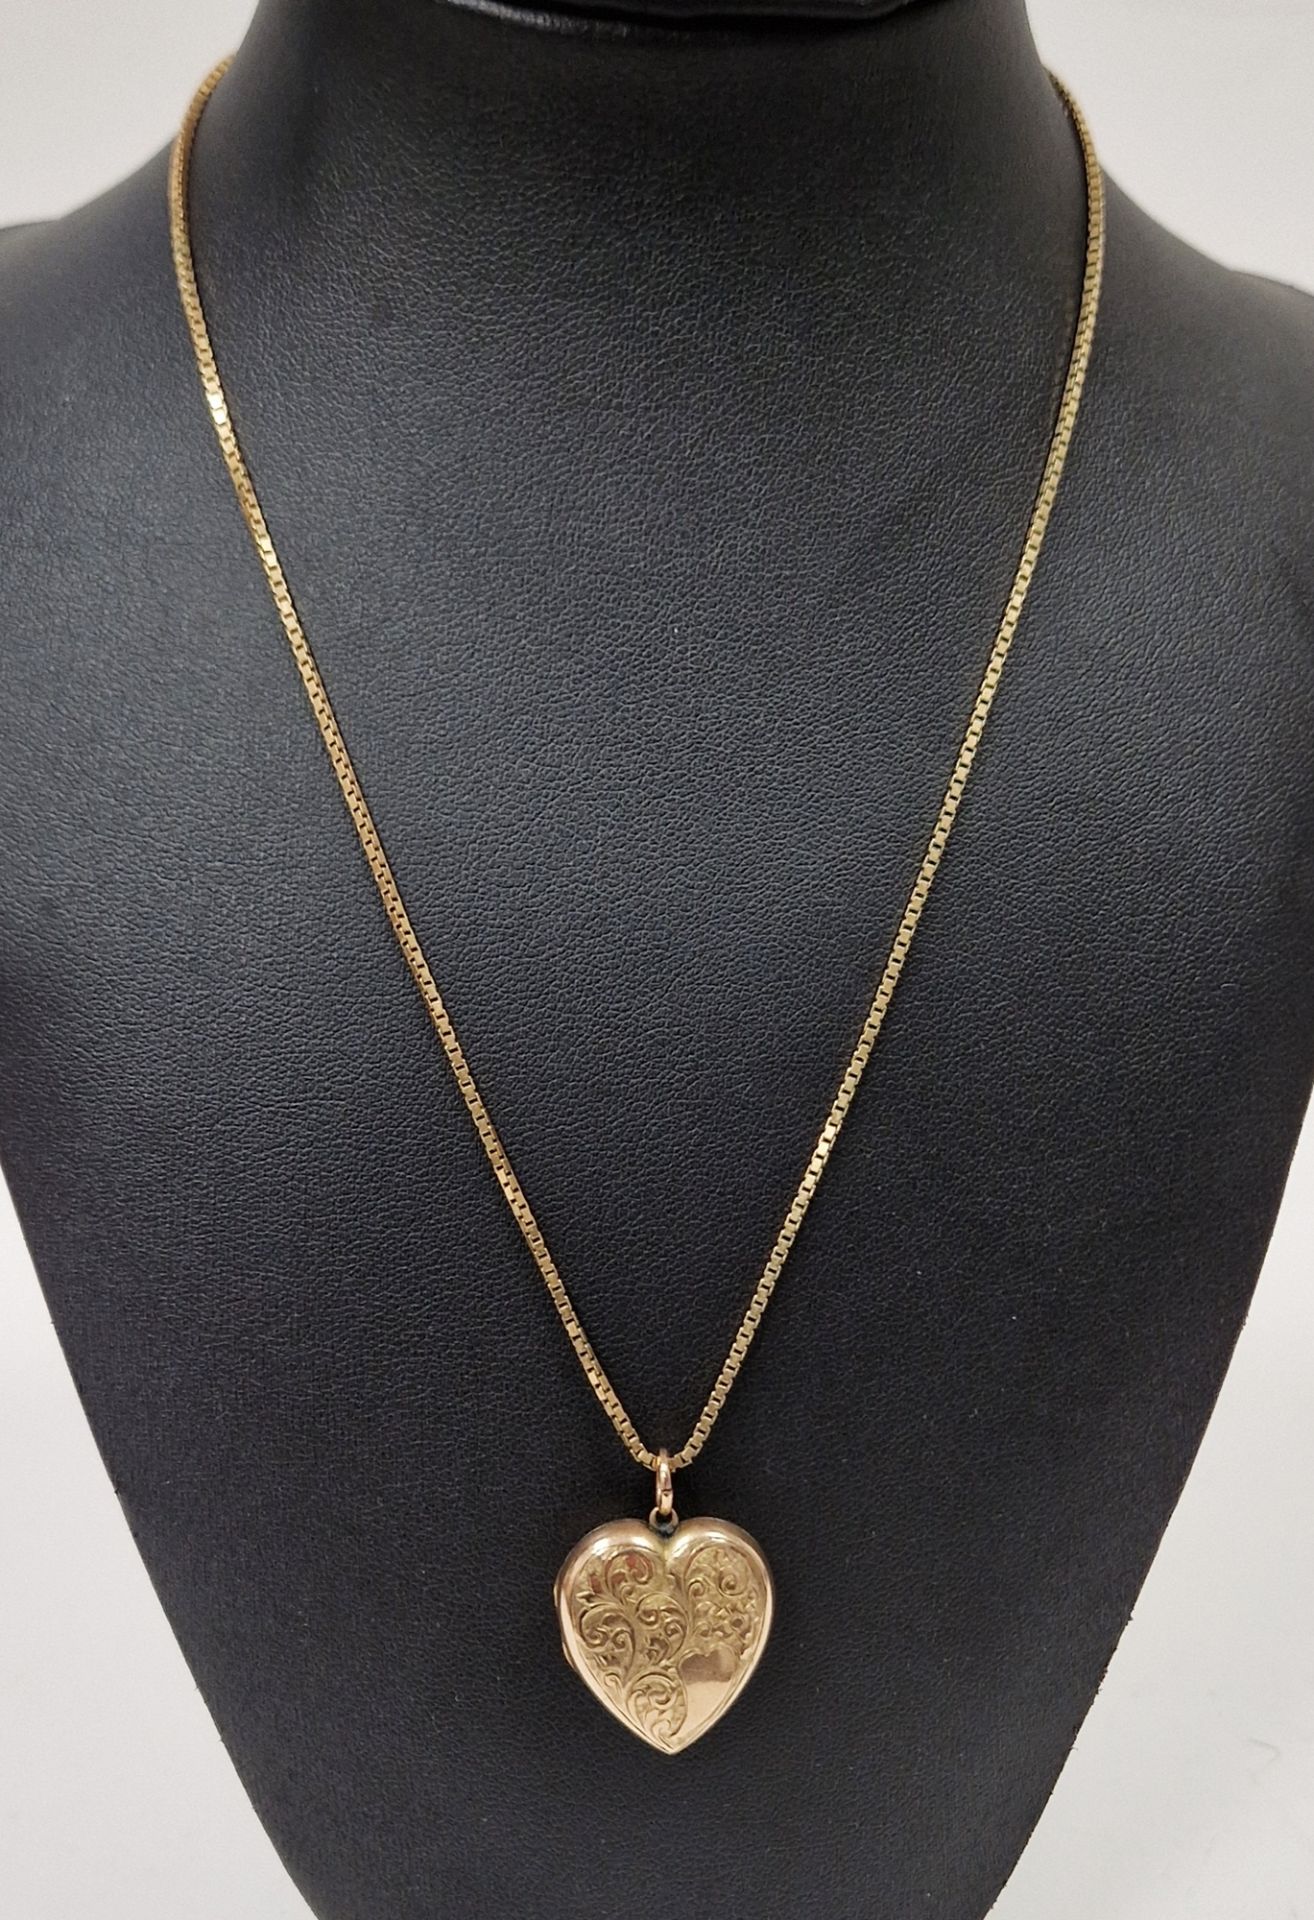 9ct gold boxlink-pattern chain necklace, 4.8g approx. and the rolled gold heart-shaped locket